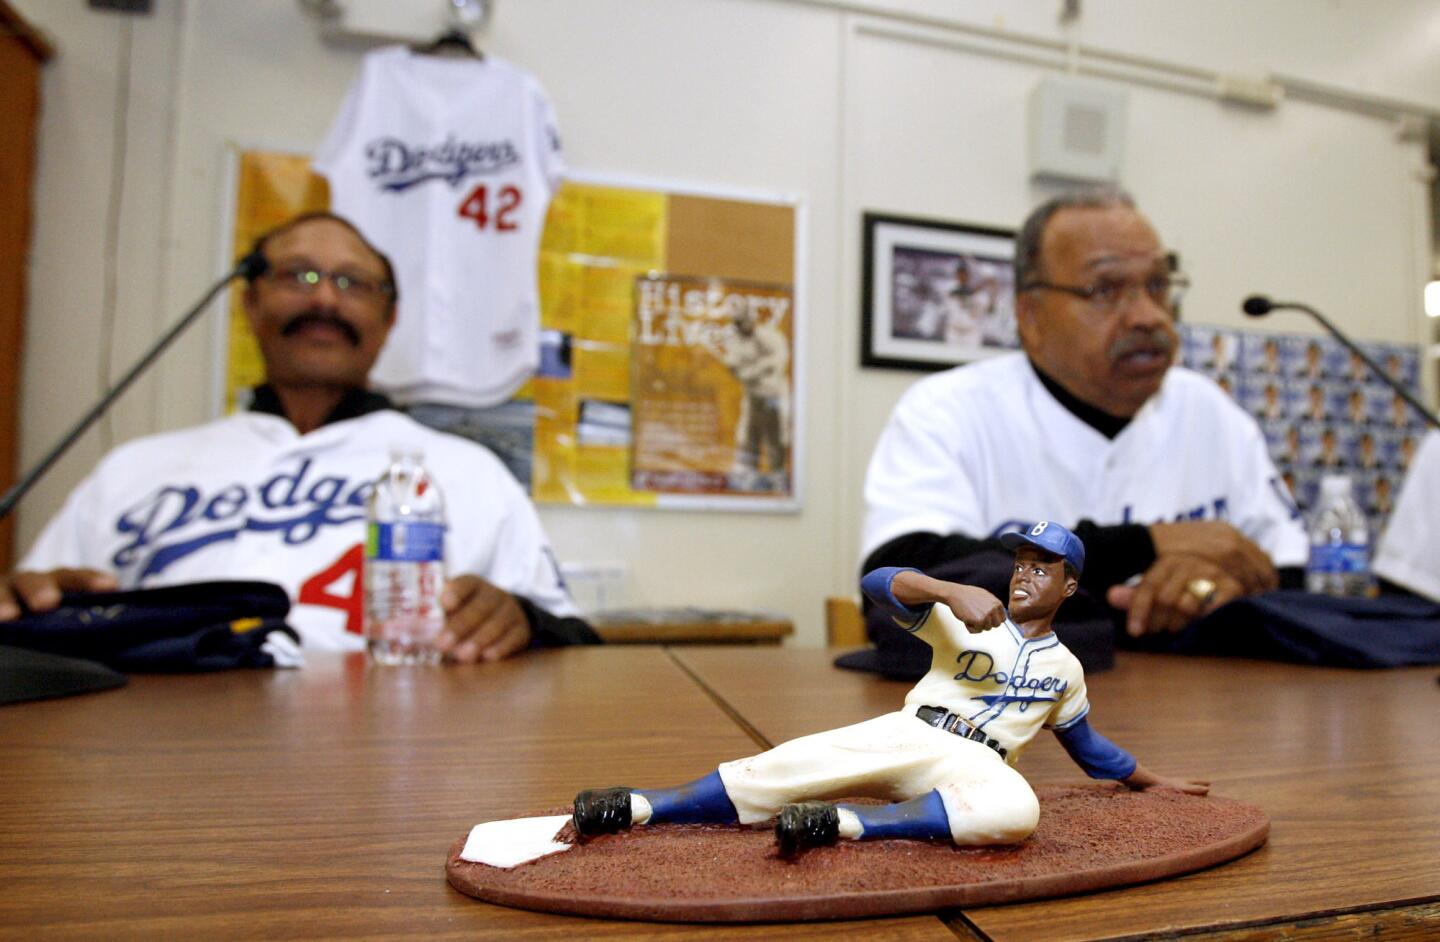 Photo Gallery: L.A. Dodgers players visit Muir High School